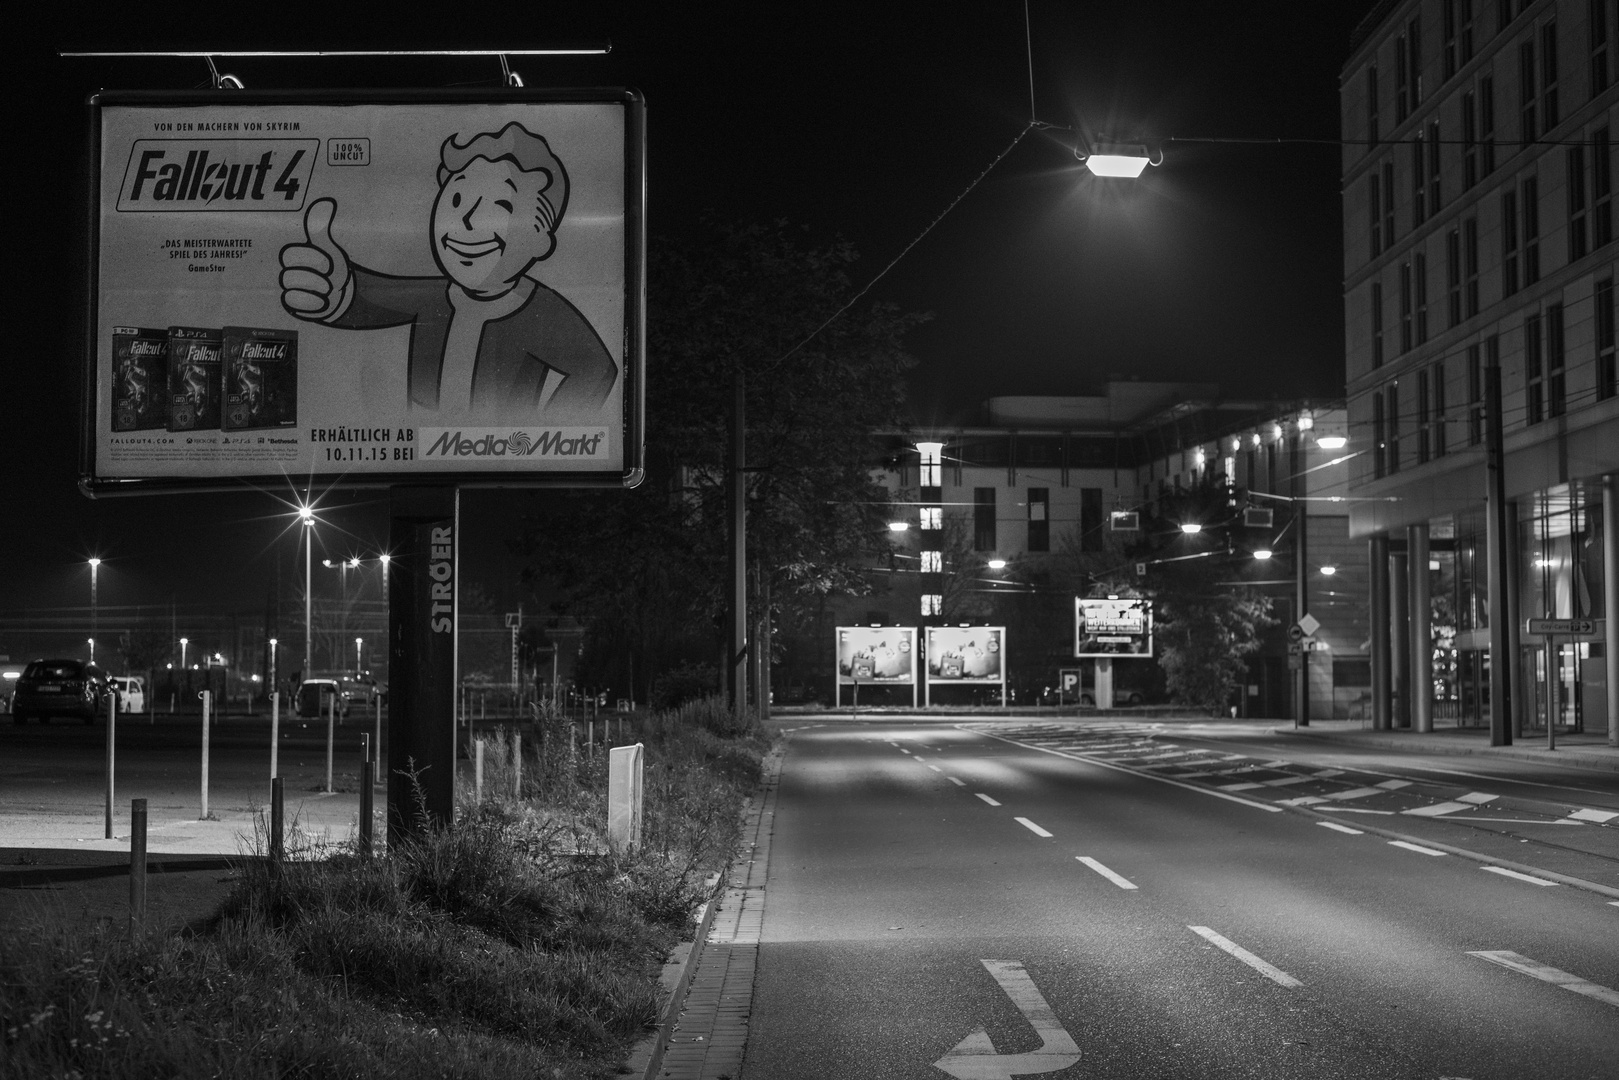 Fallout in Magdeburg